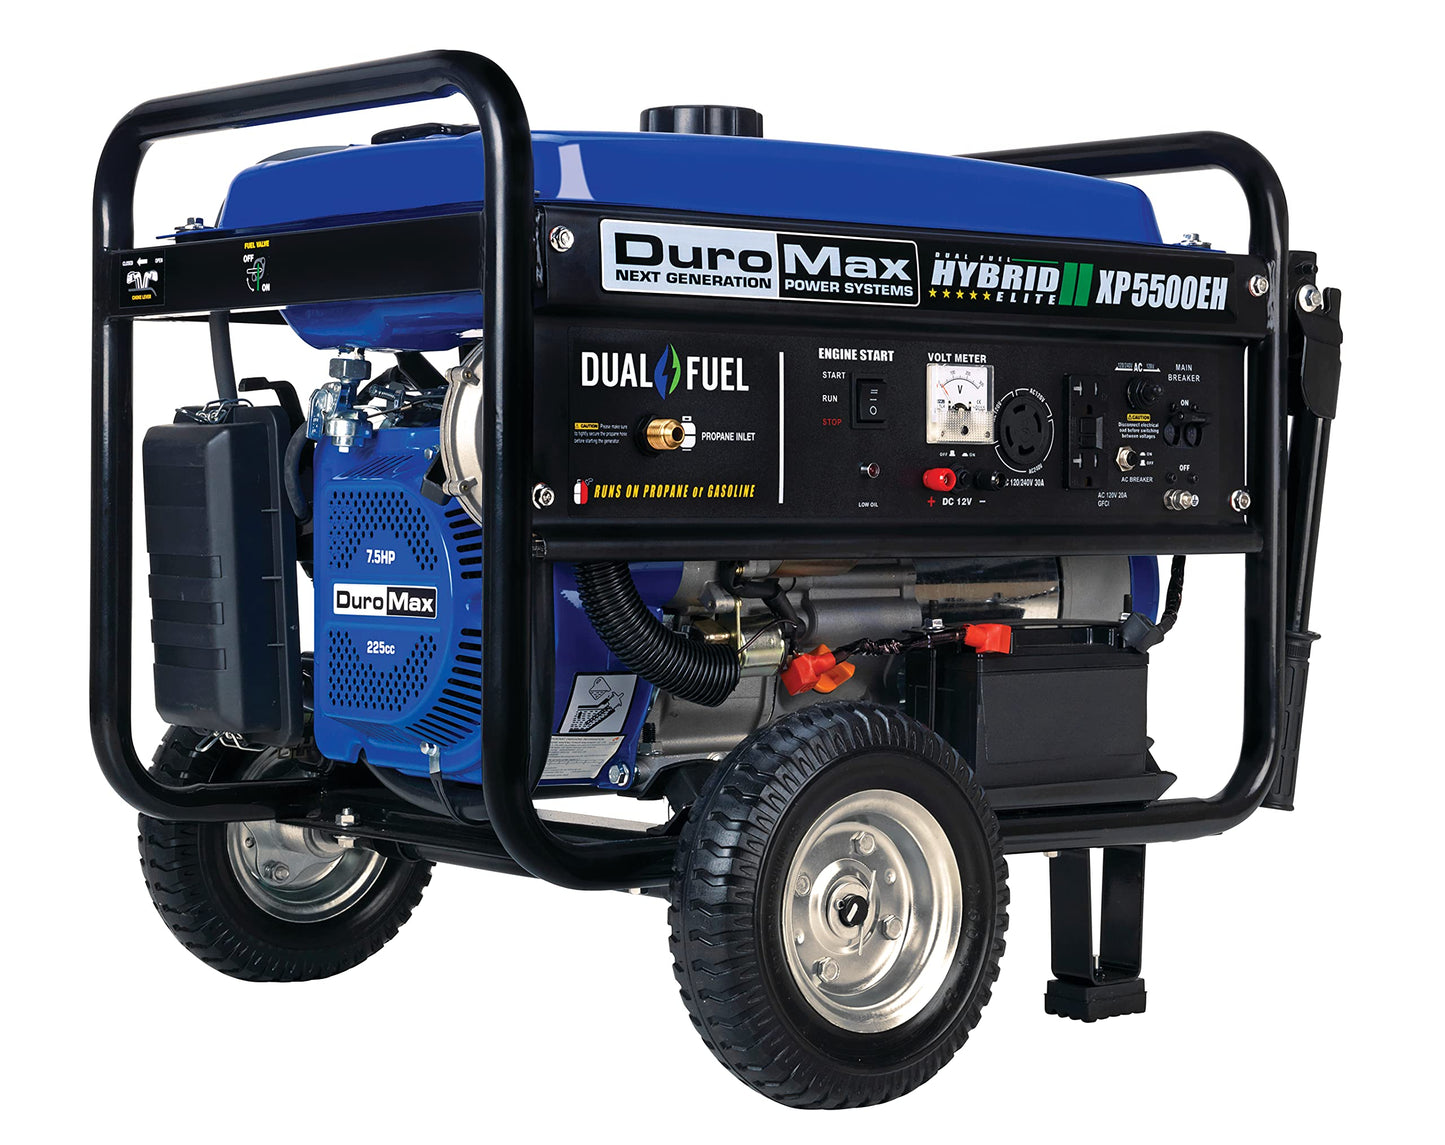 DuroMax XP5500EH Electric Start-Camping & RV Ready, 50 State Approved Dual Fuel Portable Generator-5500 Watt